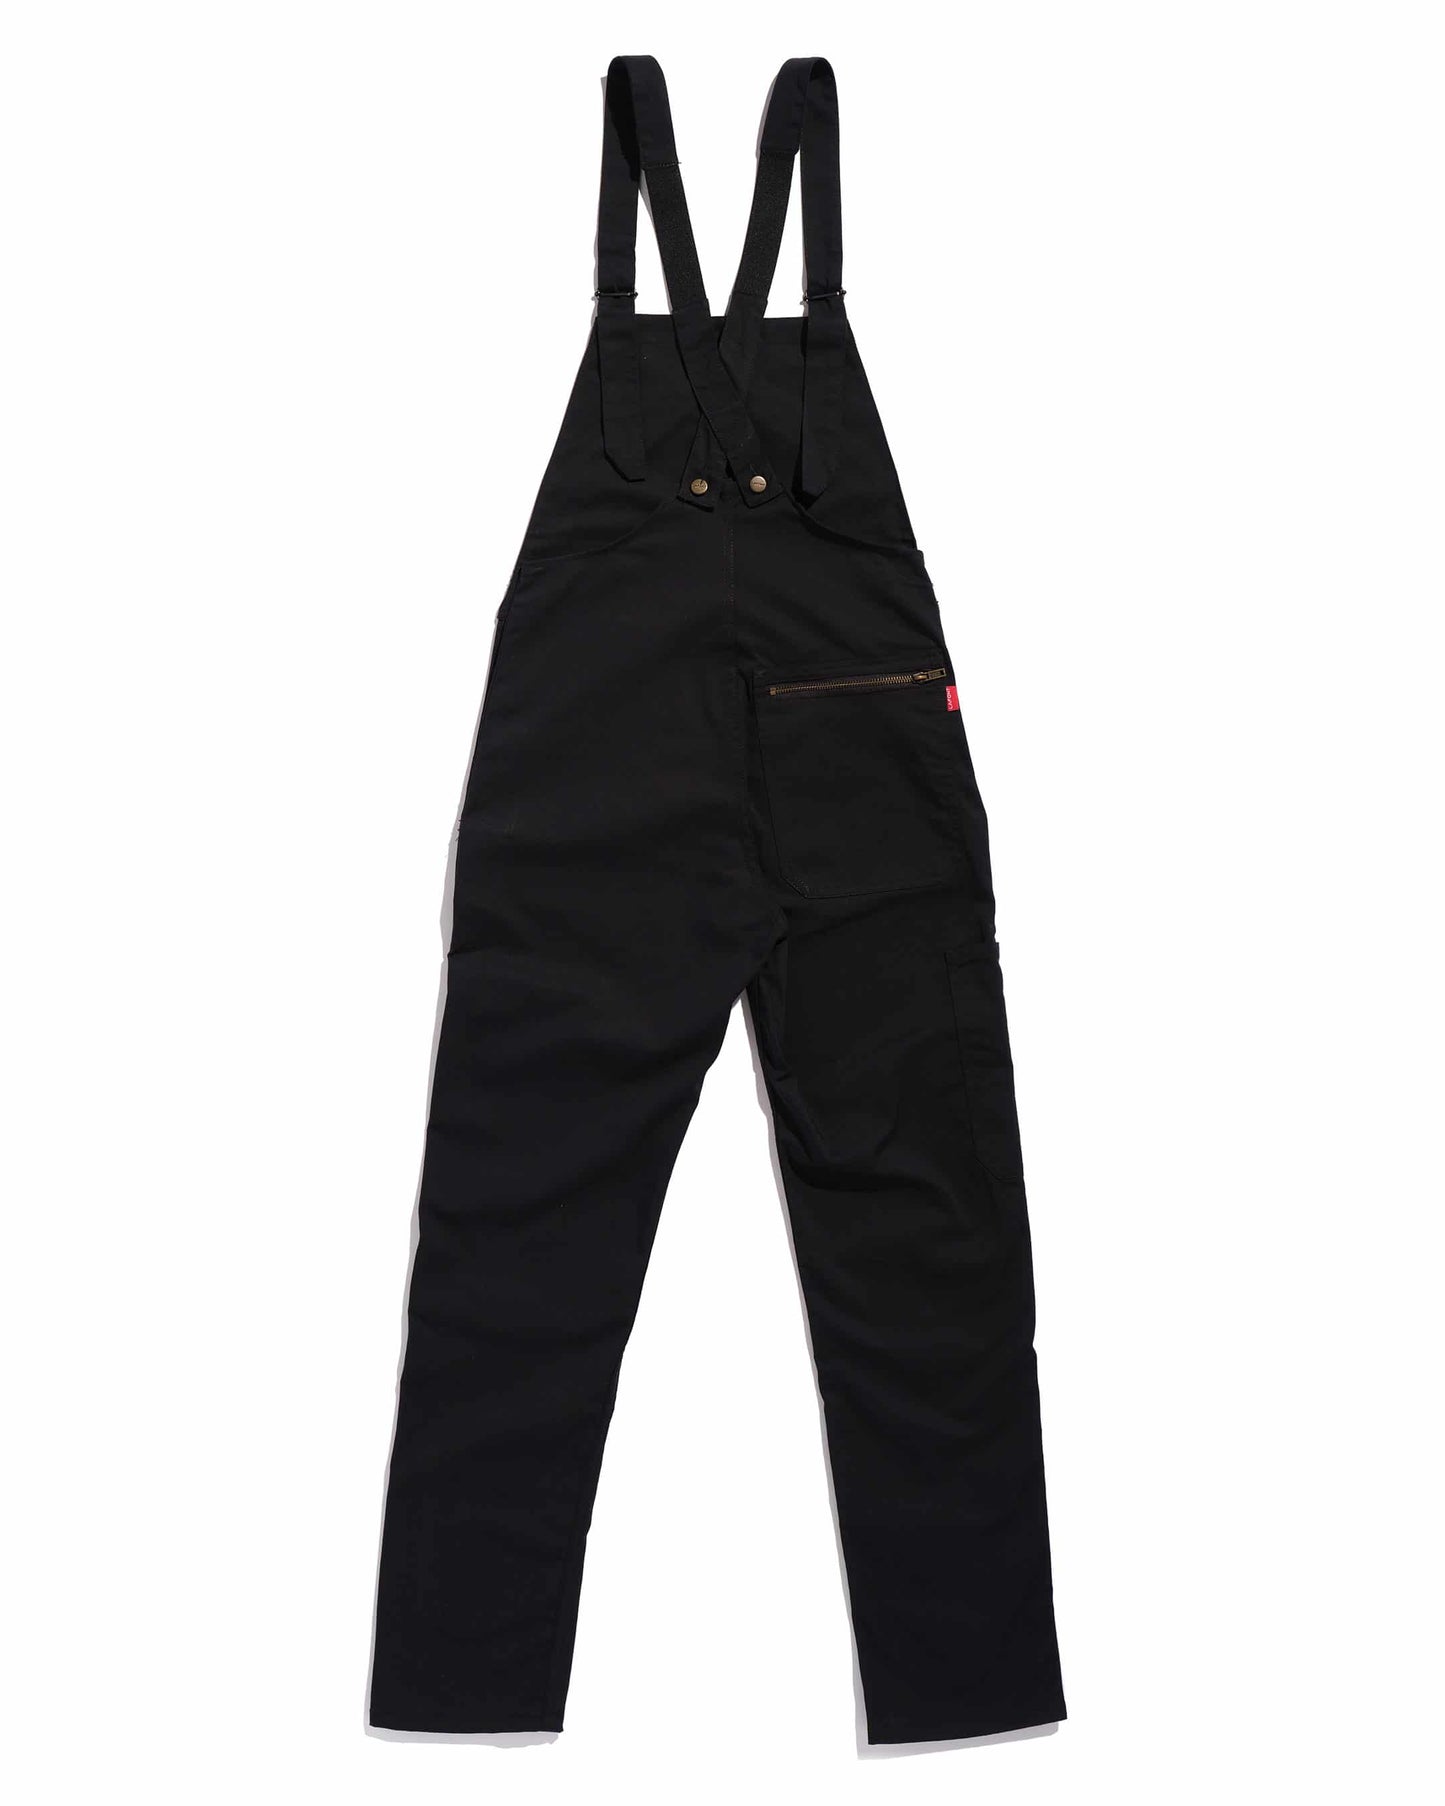 406 “sophie” polycotton overalls